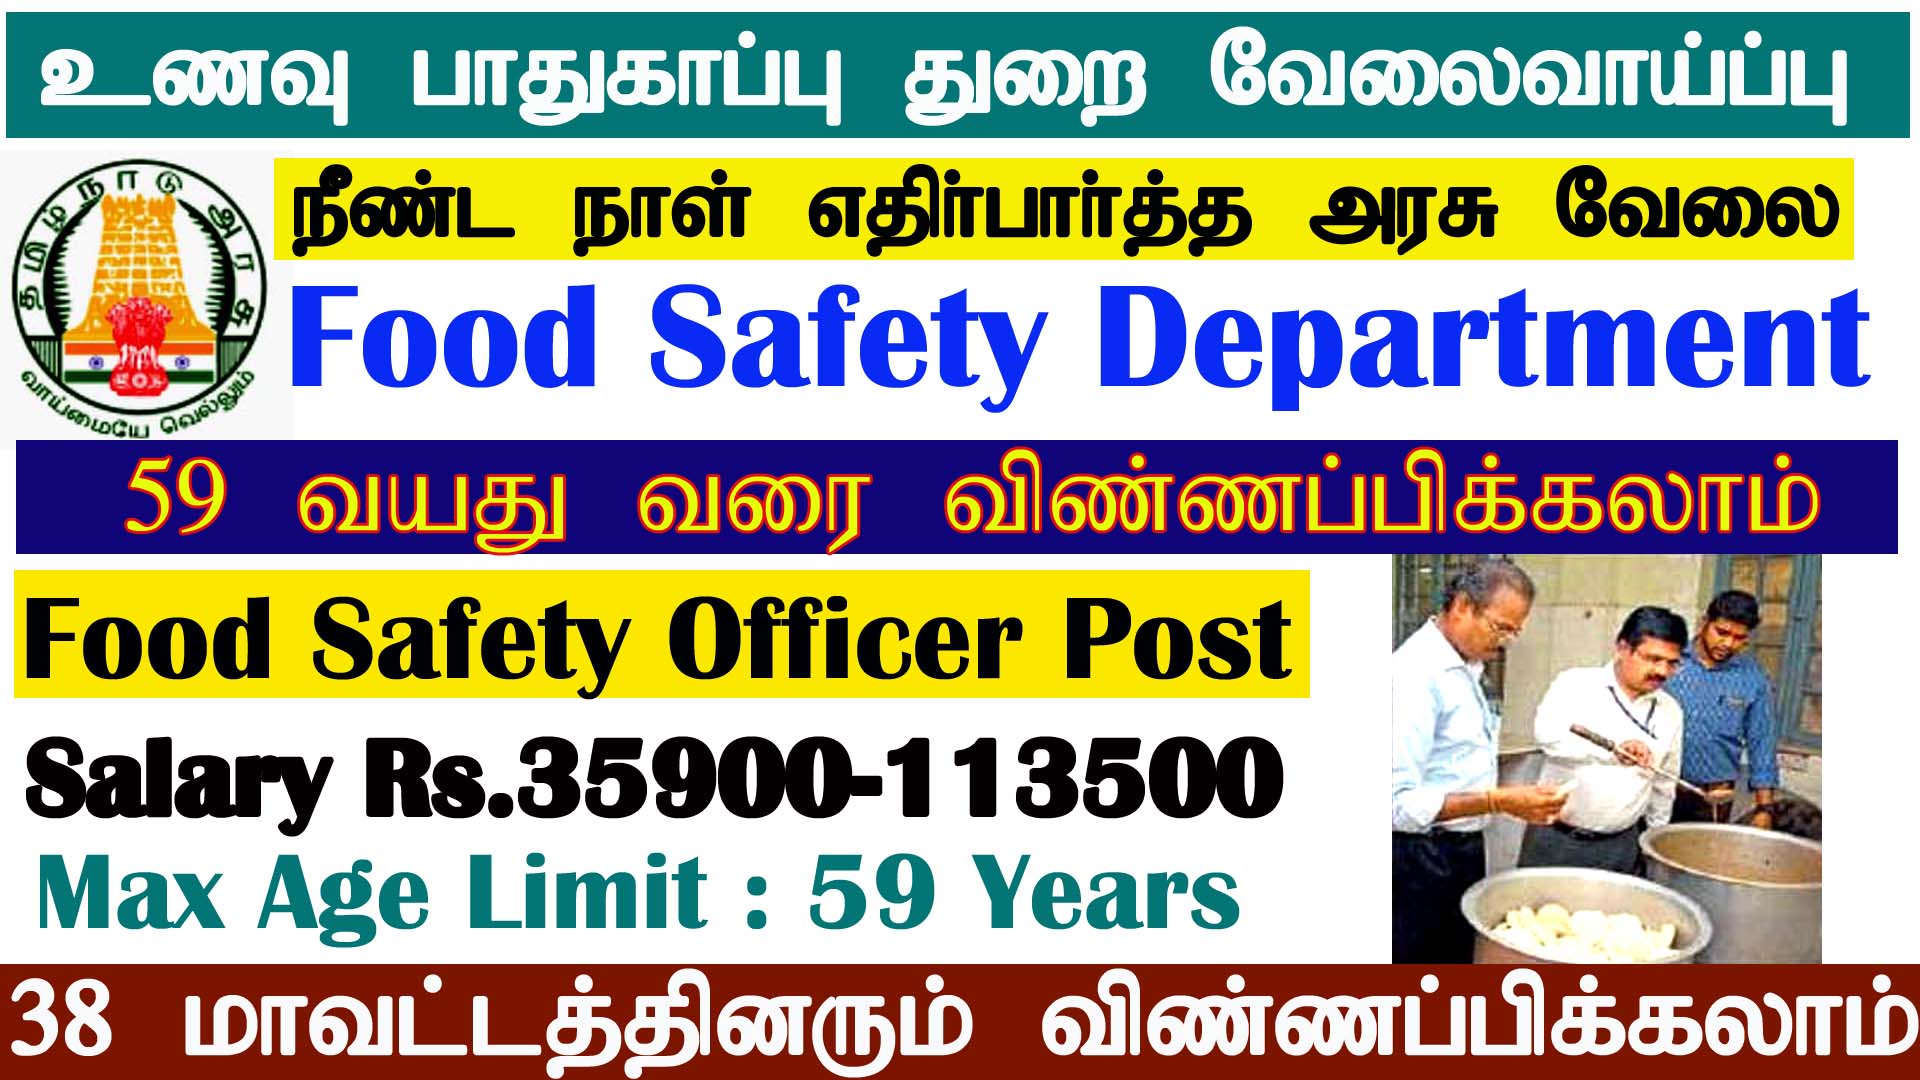 TN Food Safety Officer Recruitment 2021